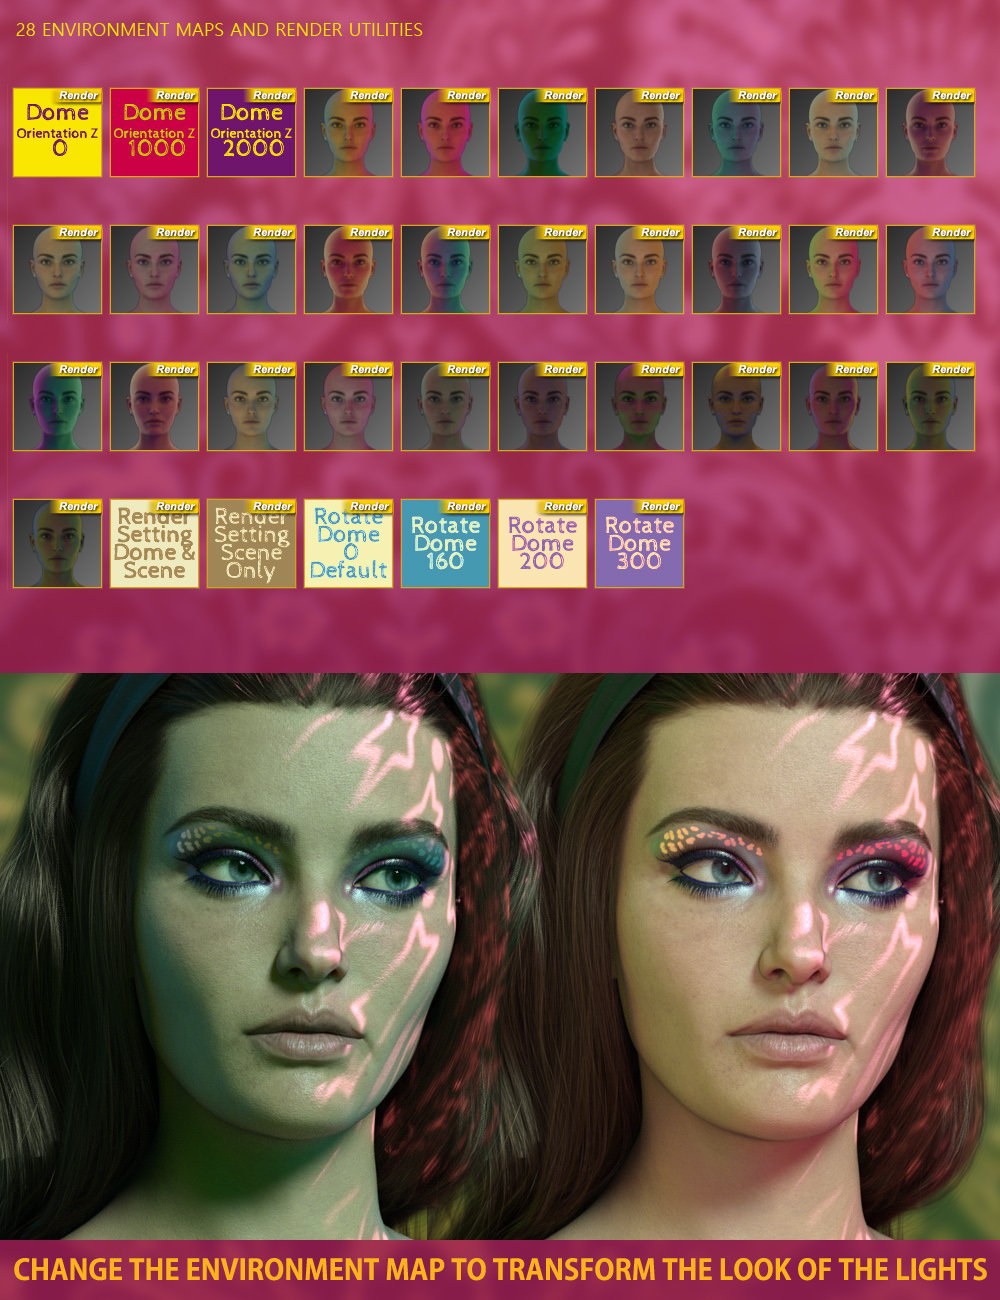 Rainbow Gel Portrait Lighting for Iray by: ForbiddenWhispers, 3D Models by Daz 3D